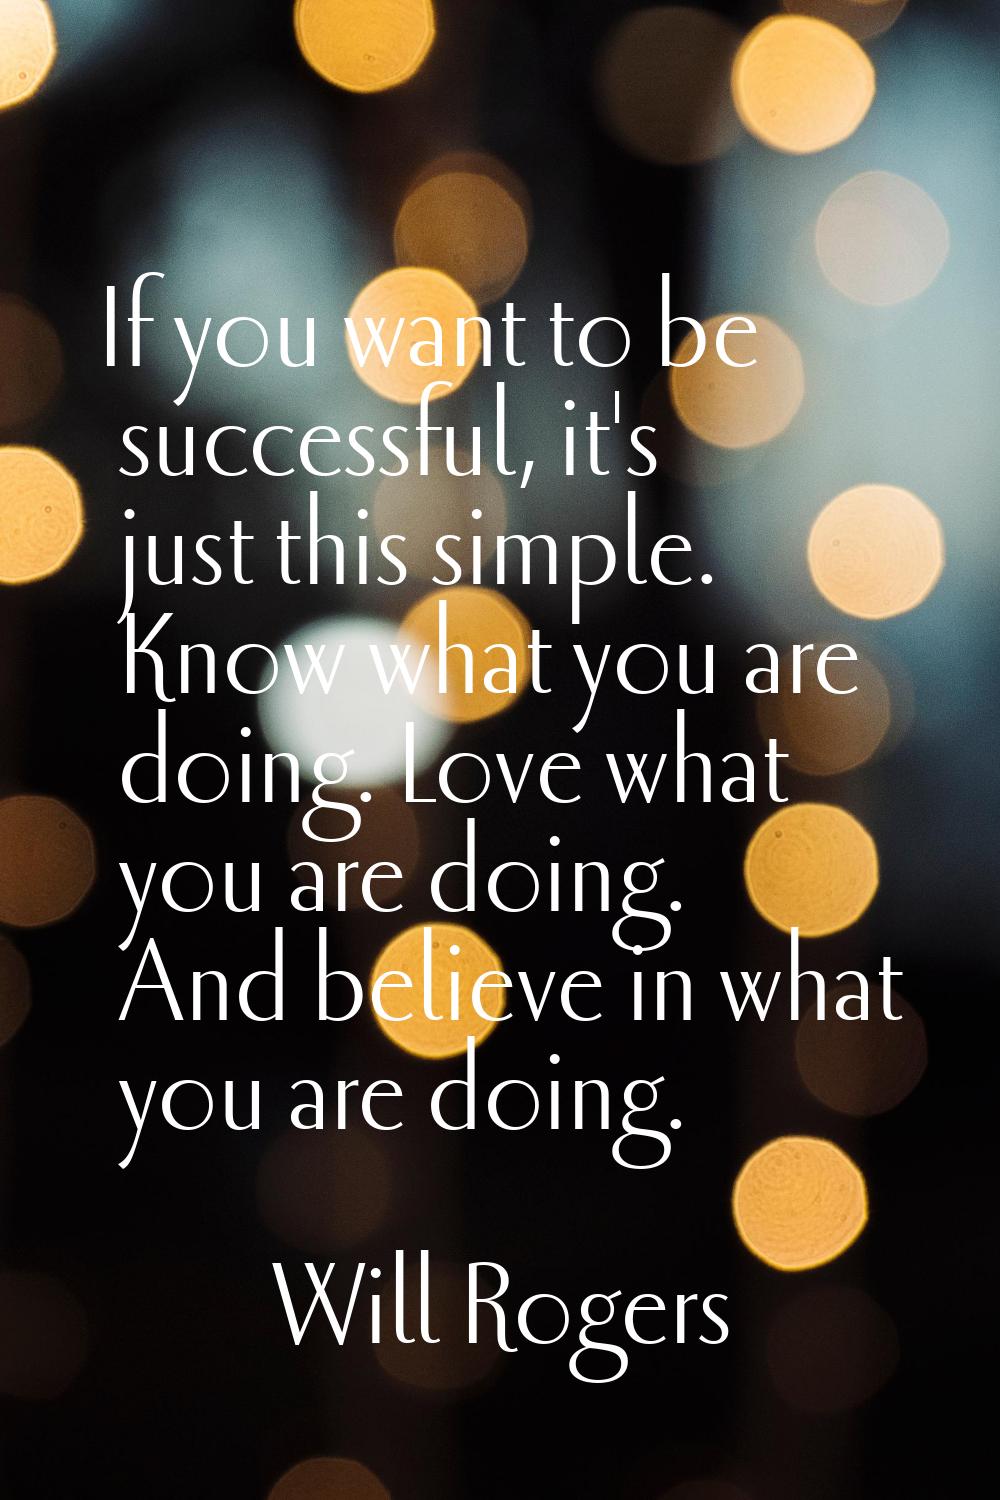 If you want to be successful, it's just this simple. Know what you are doing. Love what you are doi